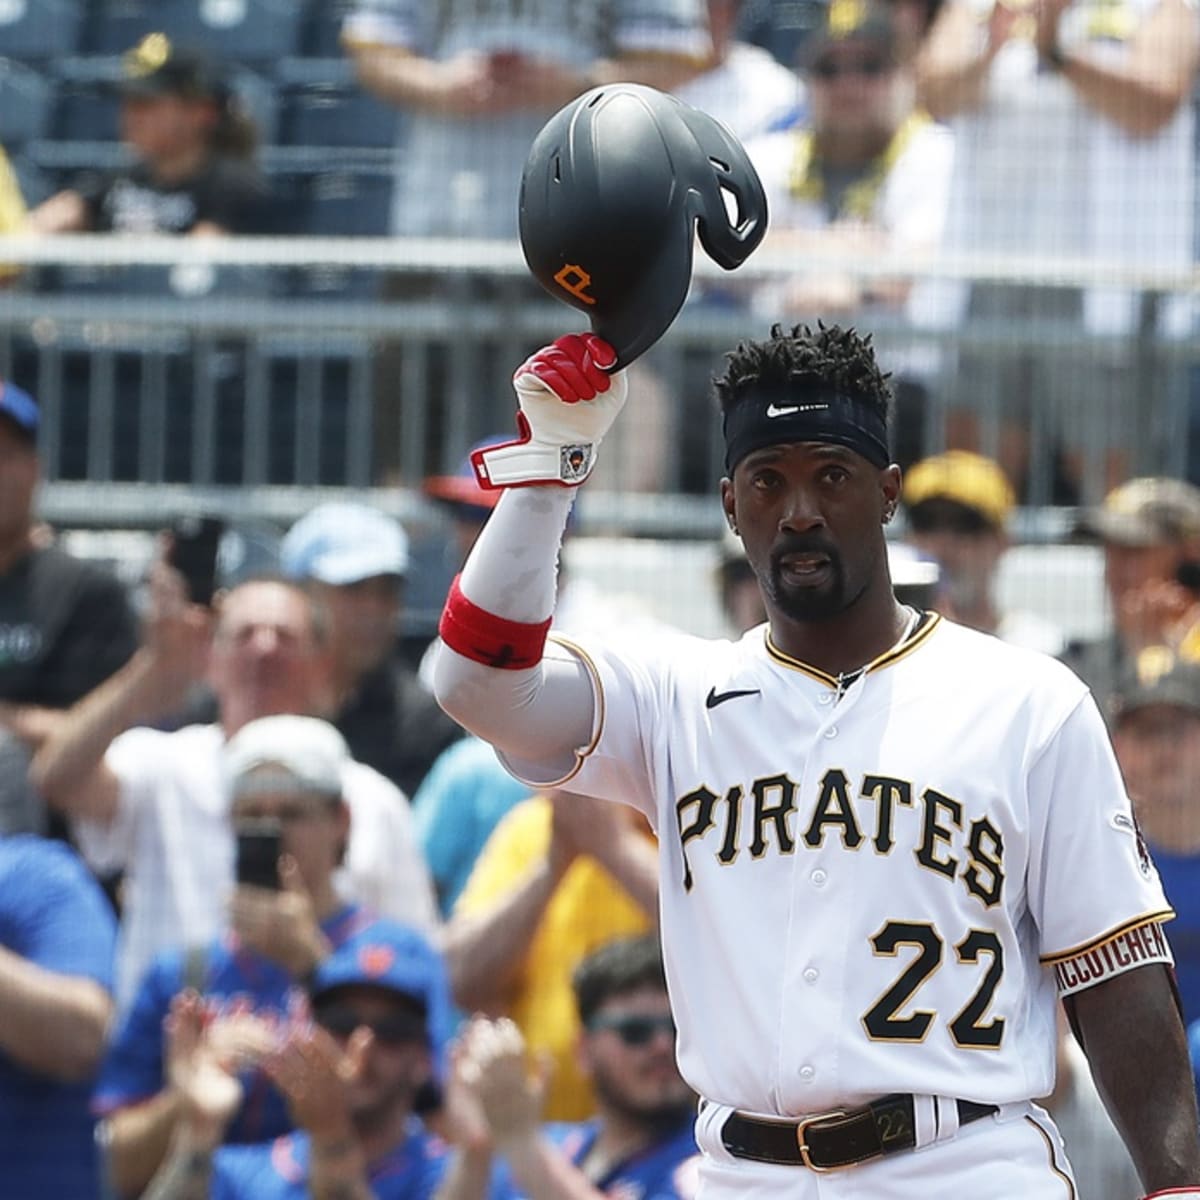 Three Pittsburgh Pirates Legends MLB The Show Should Include